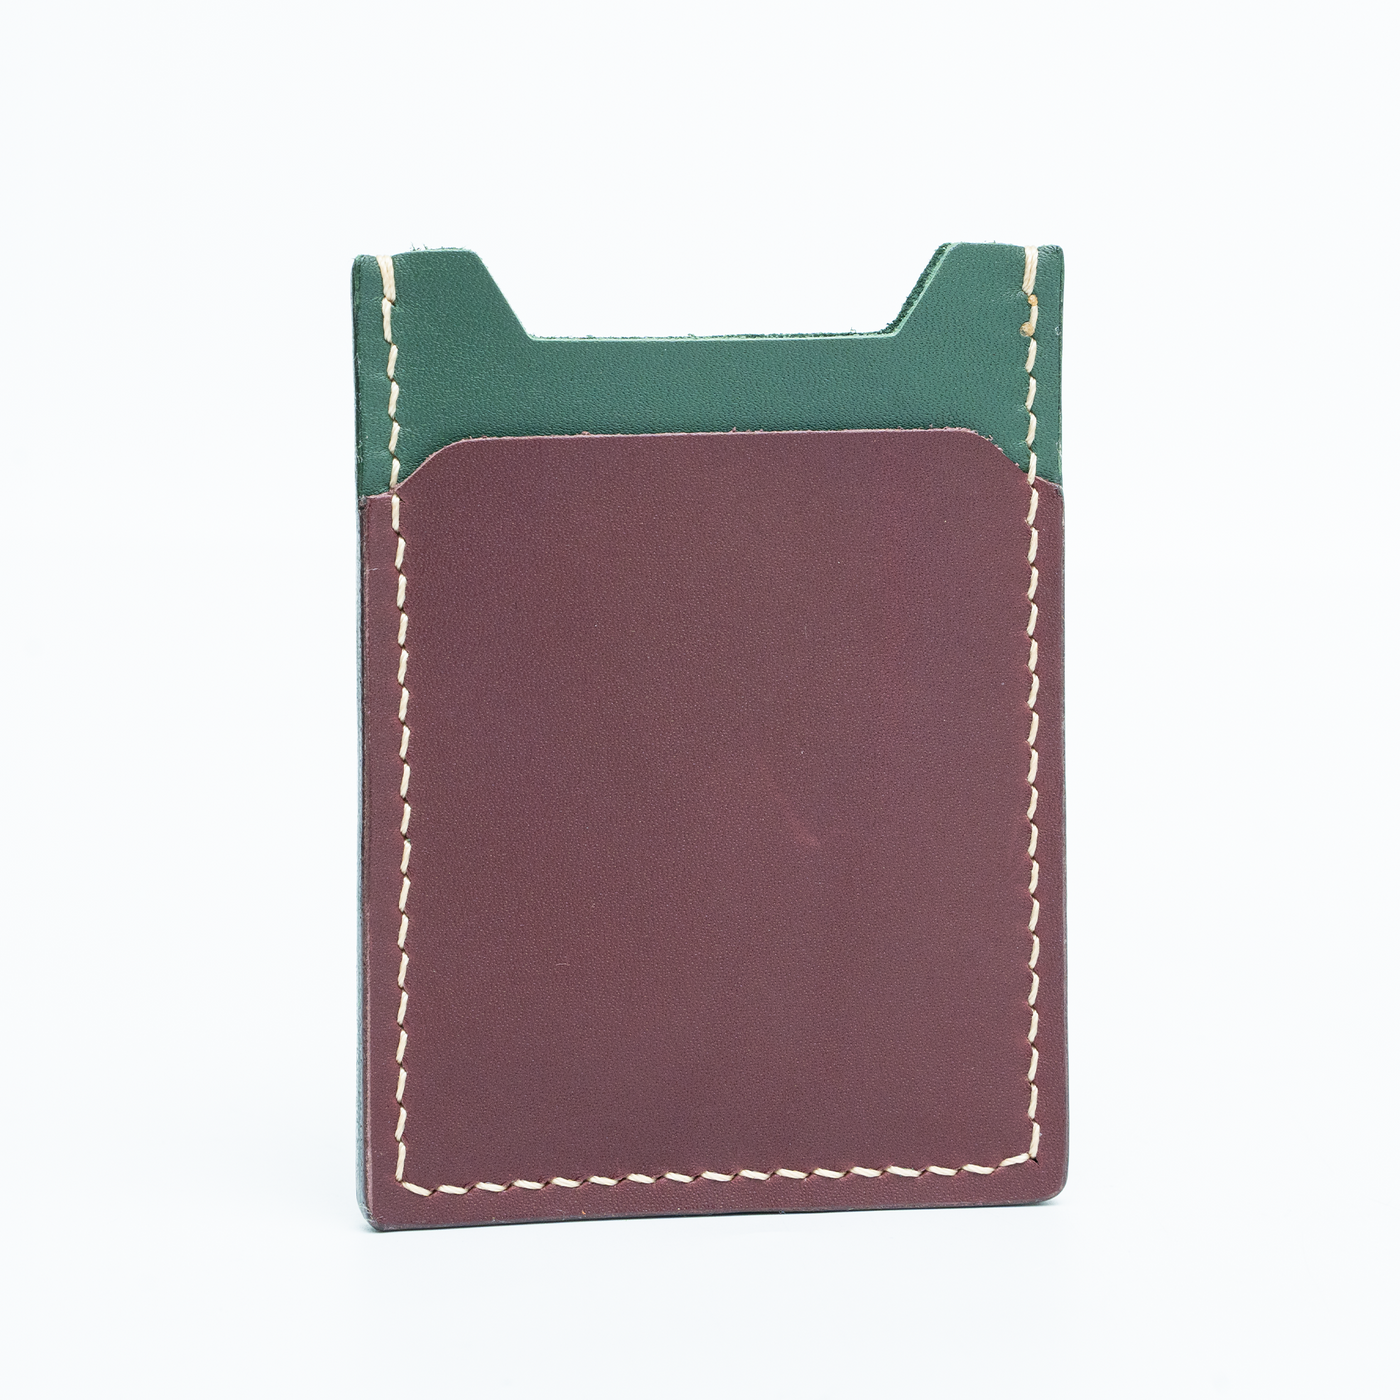 Sleek Elegance: Elevate Your Essentials with Our Stylish Card Holder!